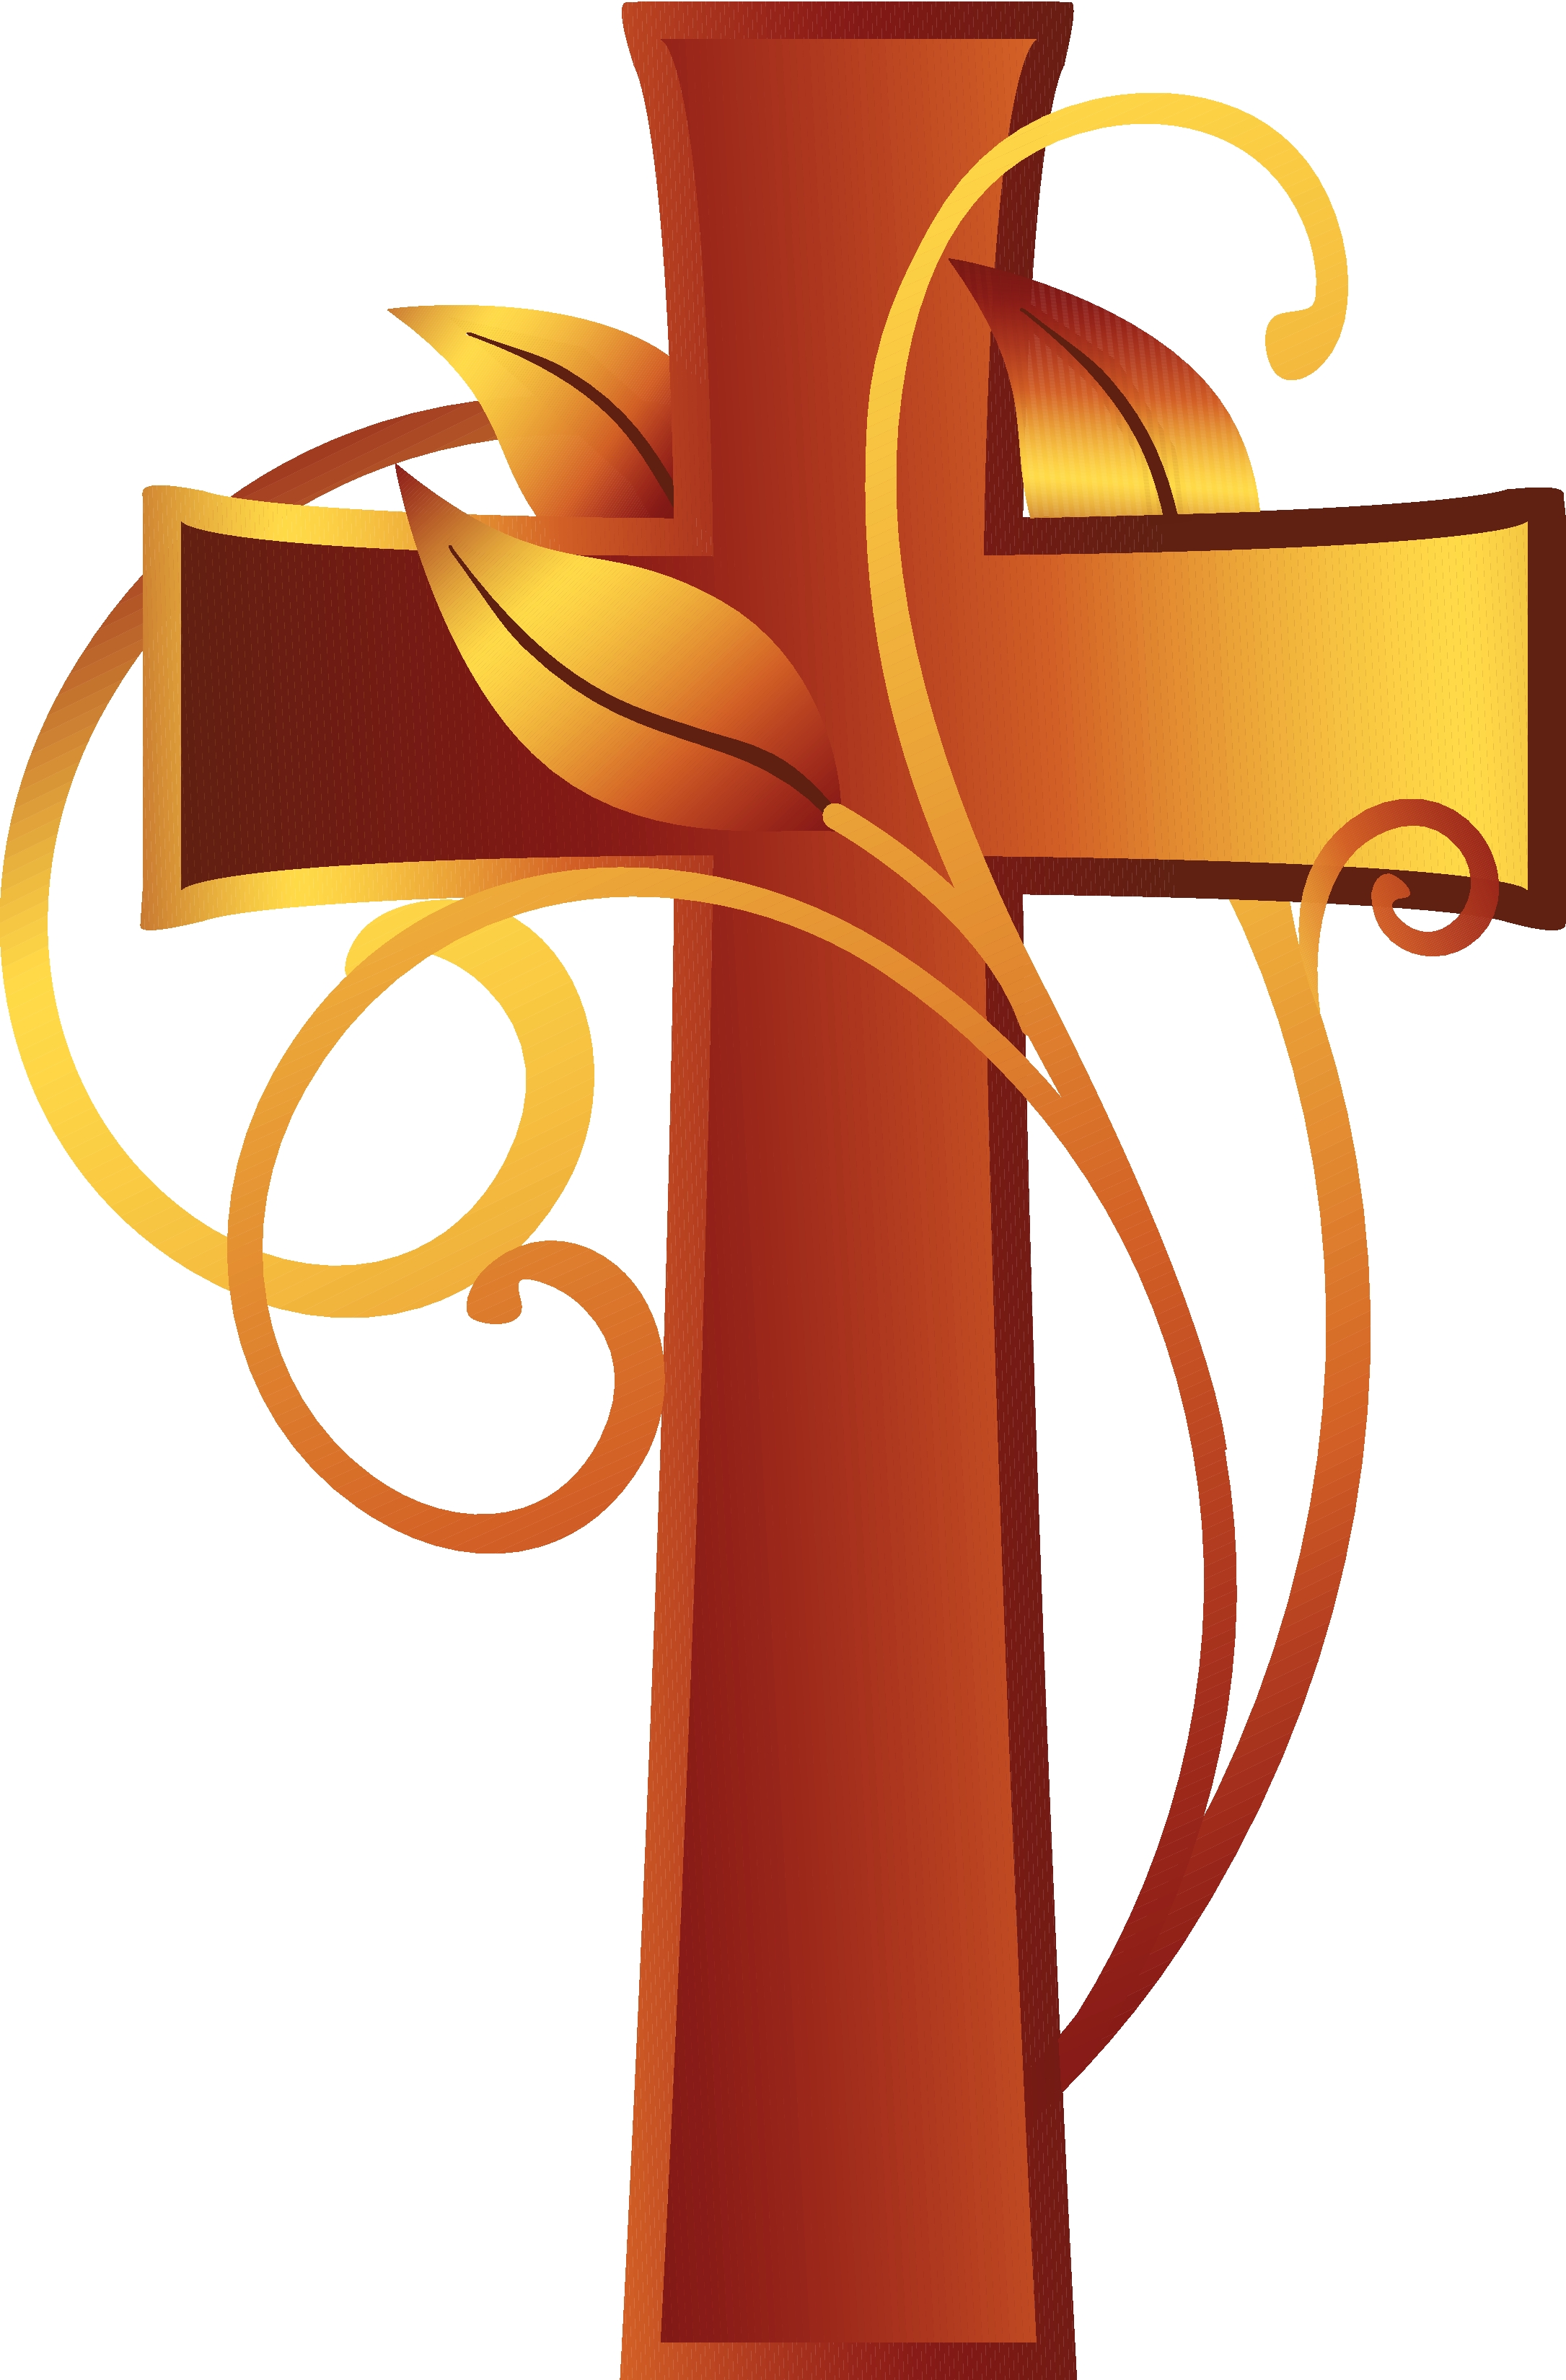 Himself As The Disciple Whom  - Religious Clip Art Free